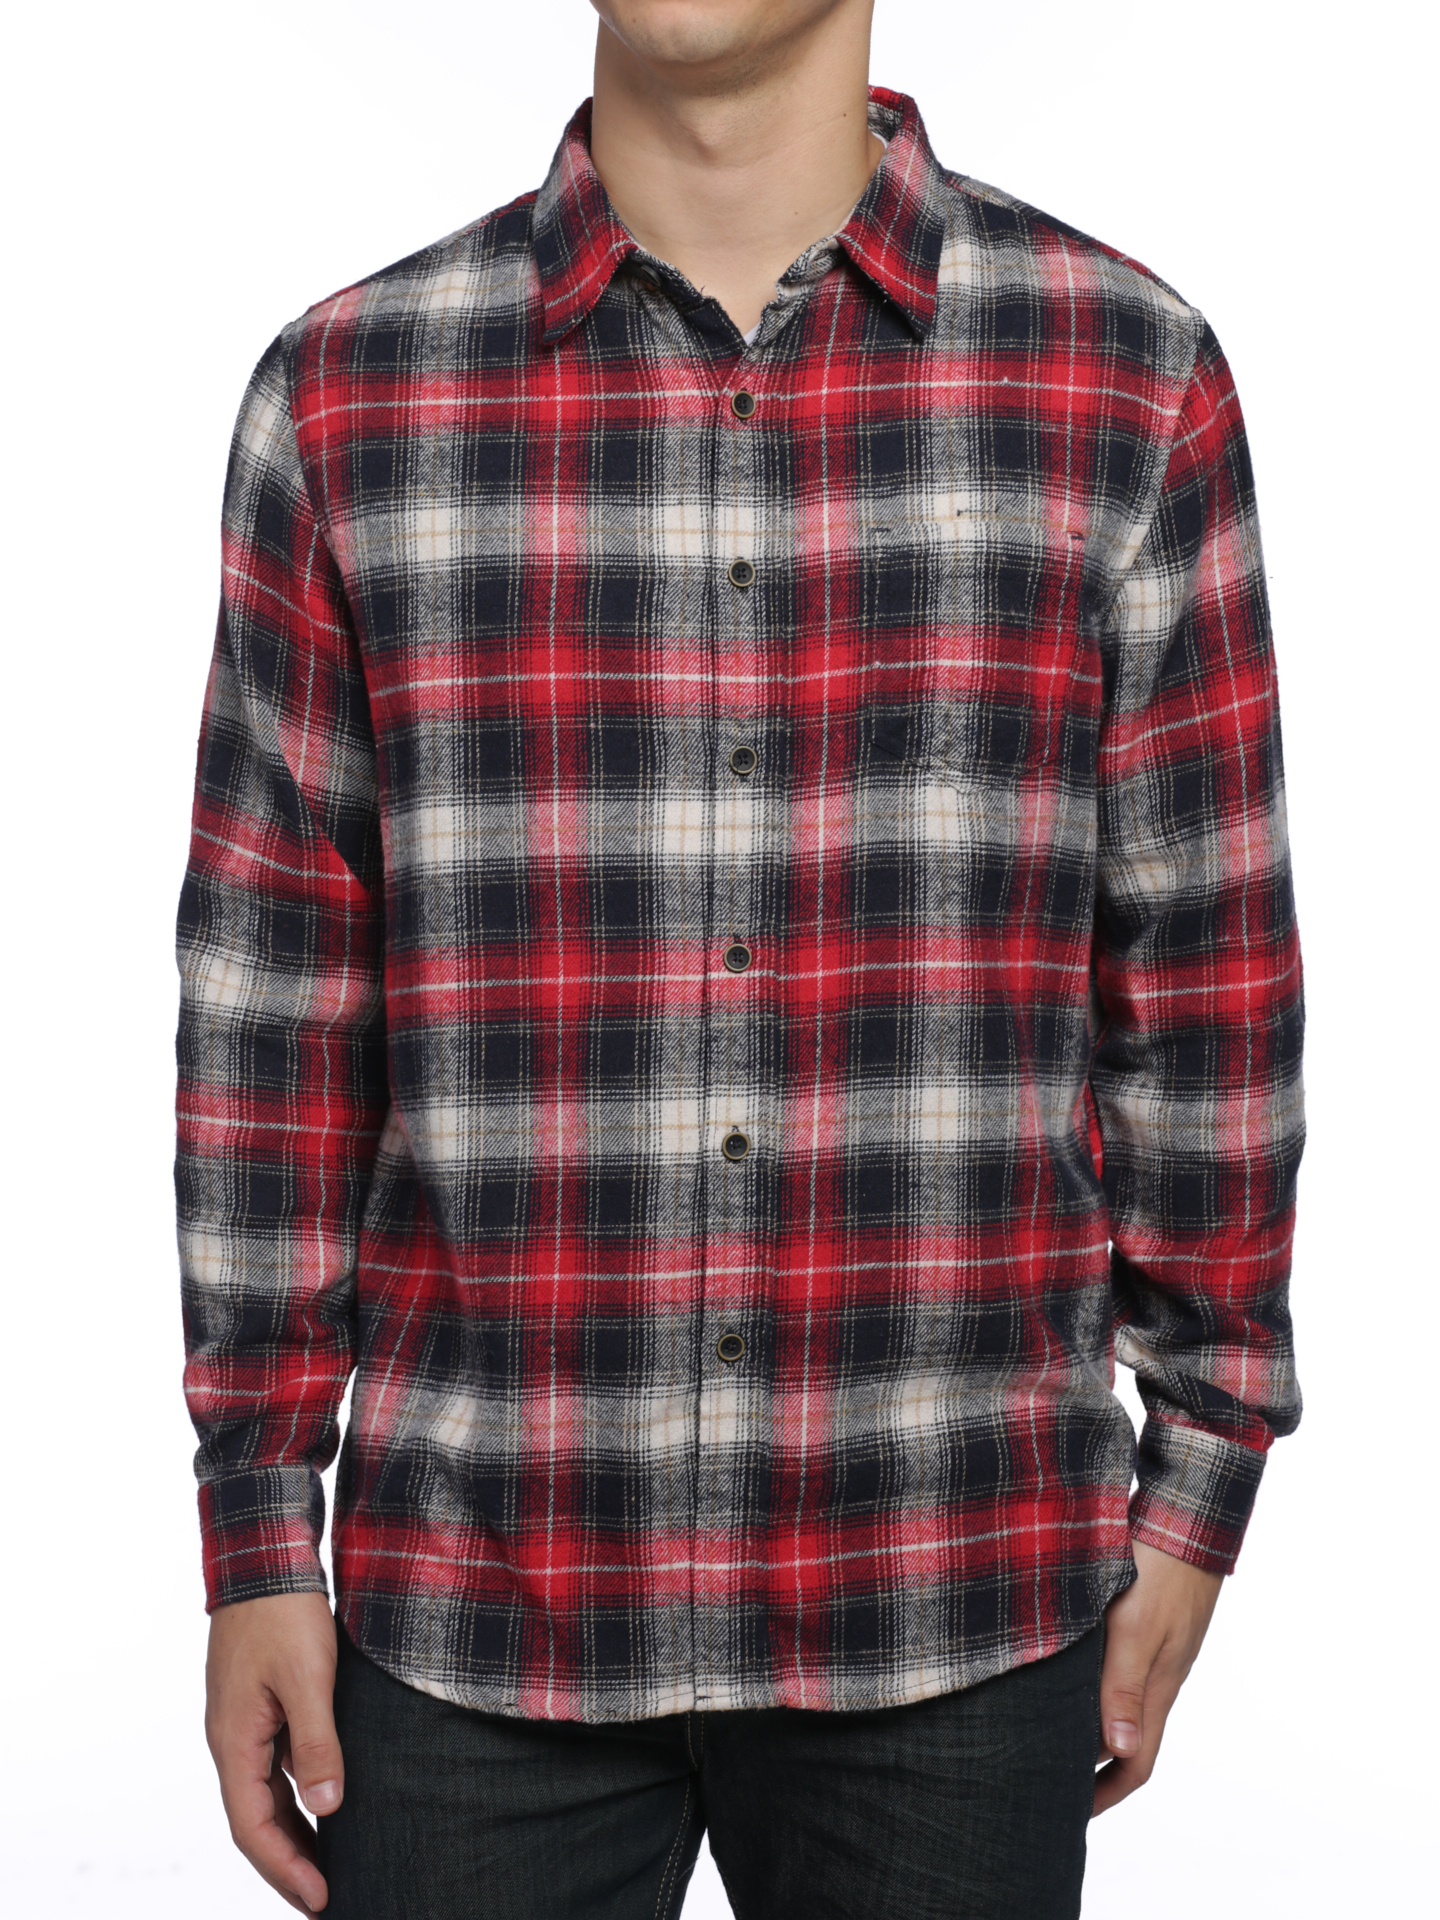 Club Room Men/'s Plaid Flannel Small Long Sleeve Button Down Shirt Navy Red Gray